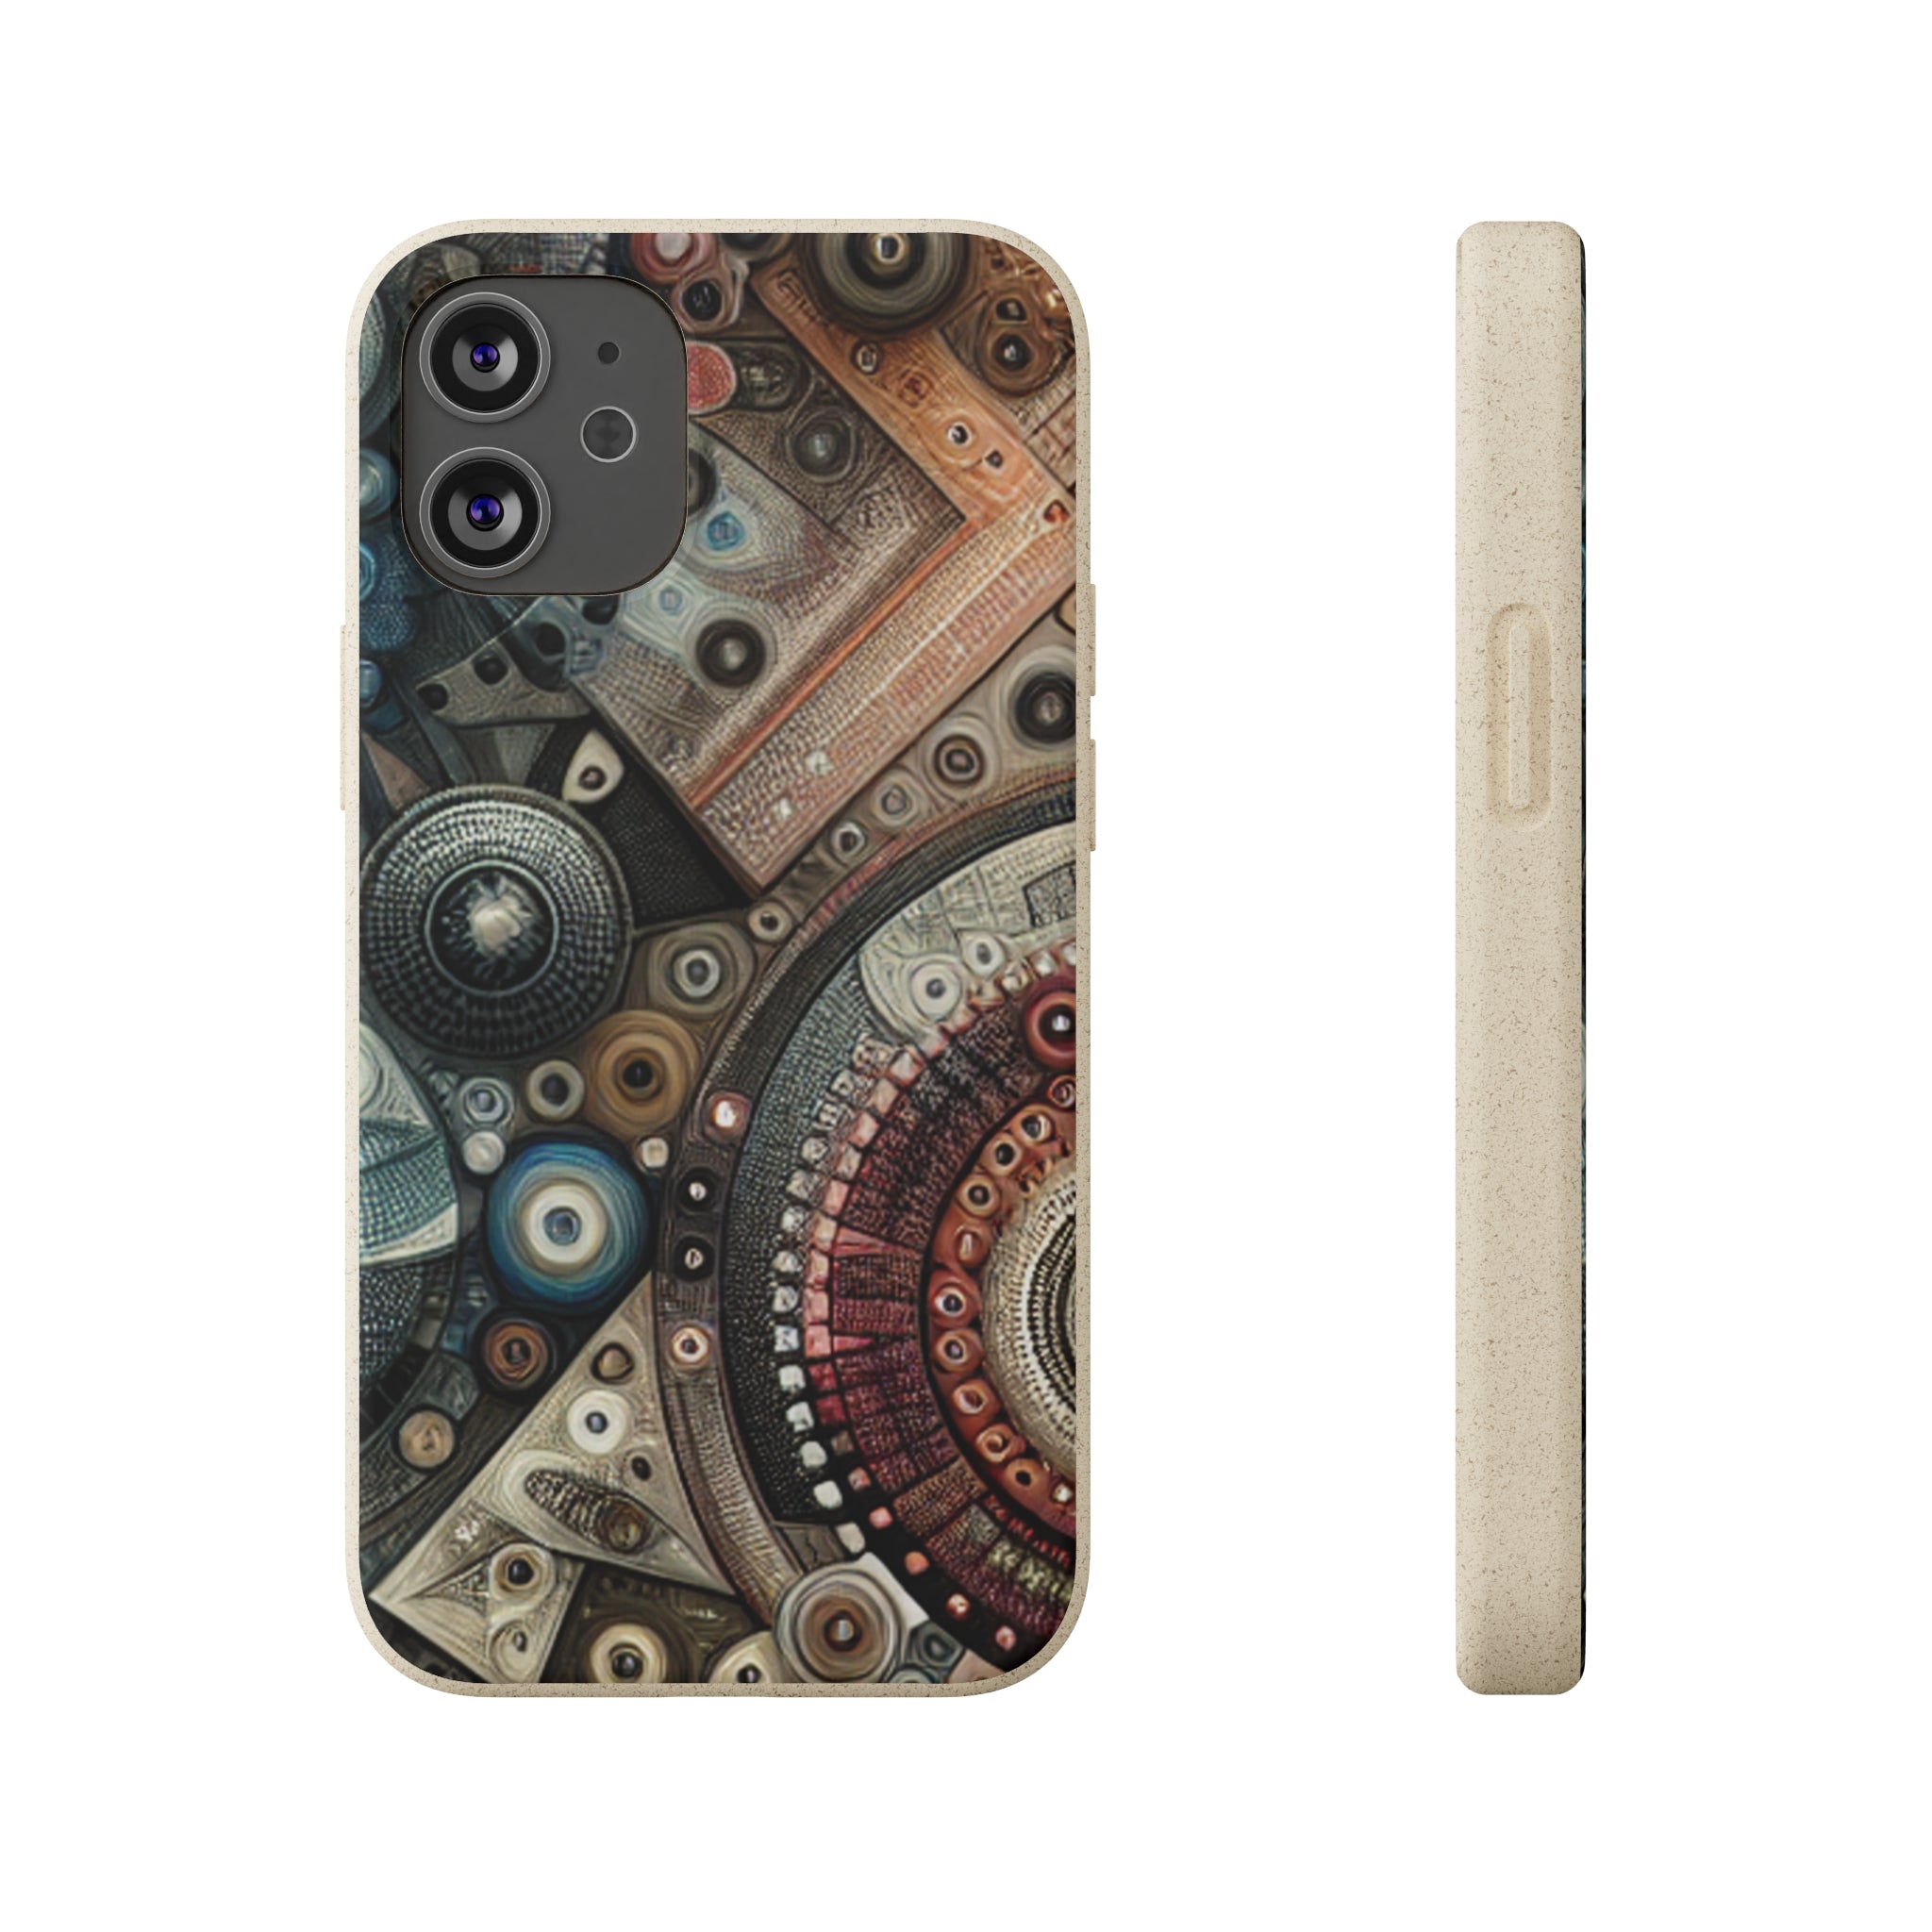 Jenna Crafts - Biodegradable iPhone Cases